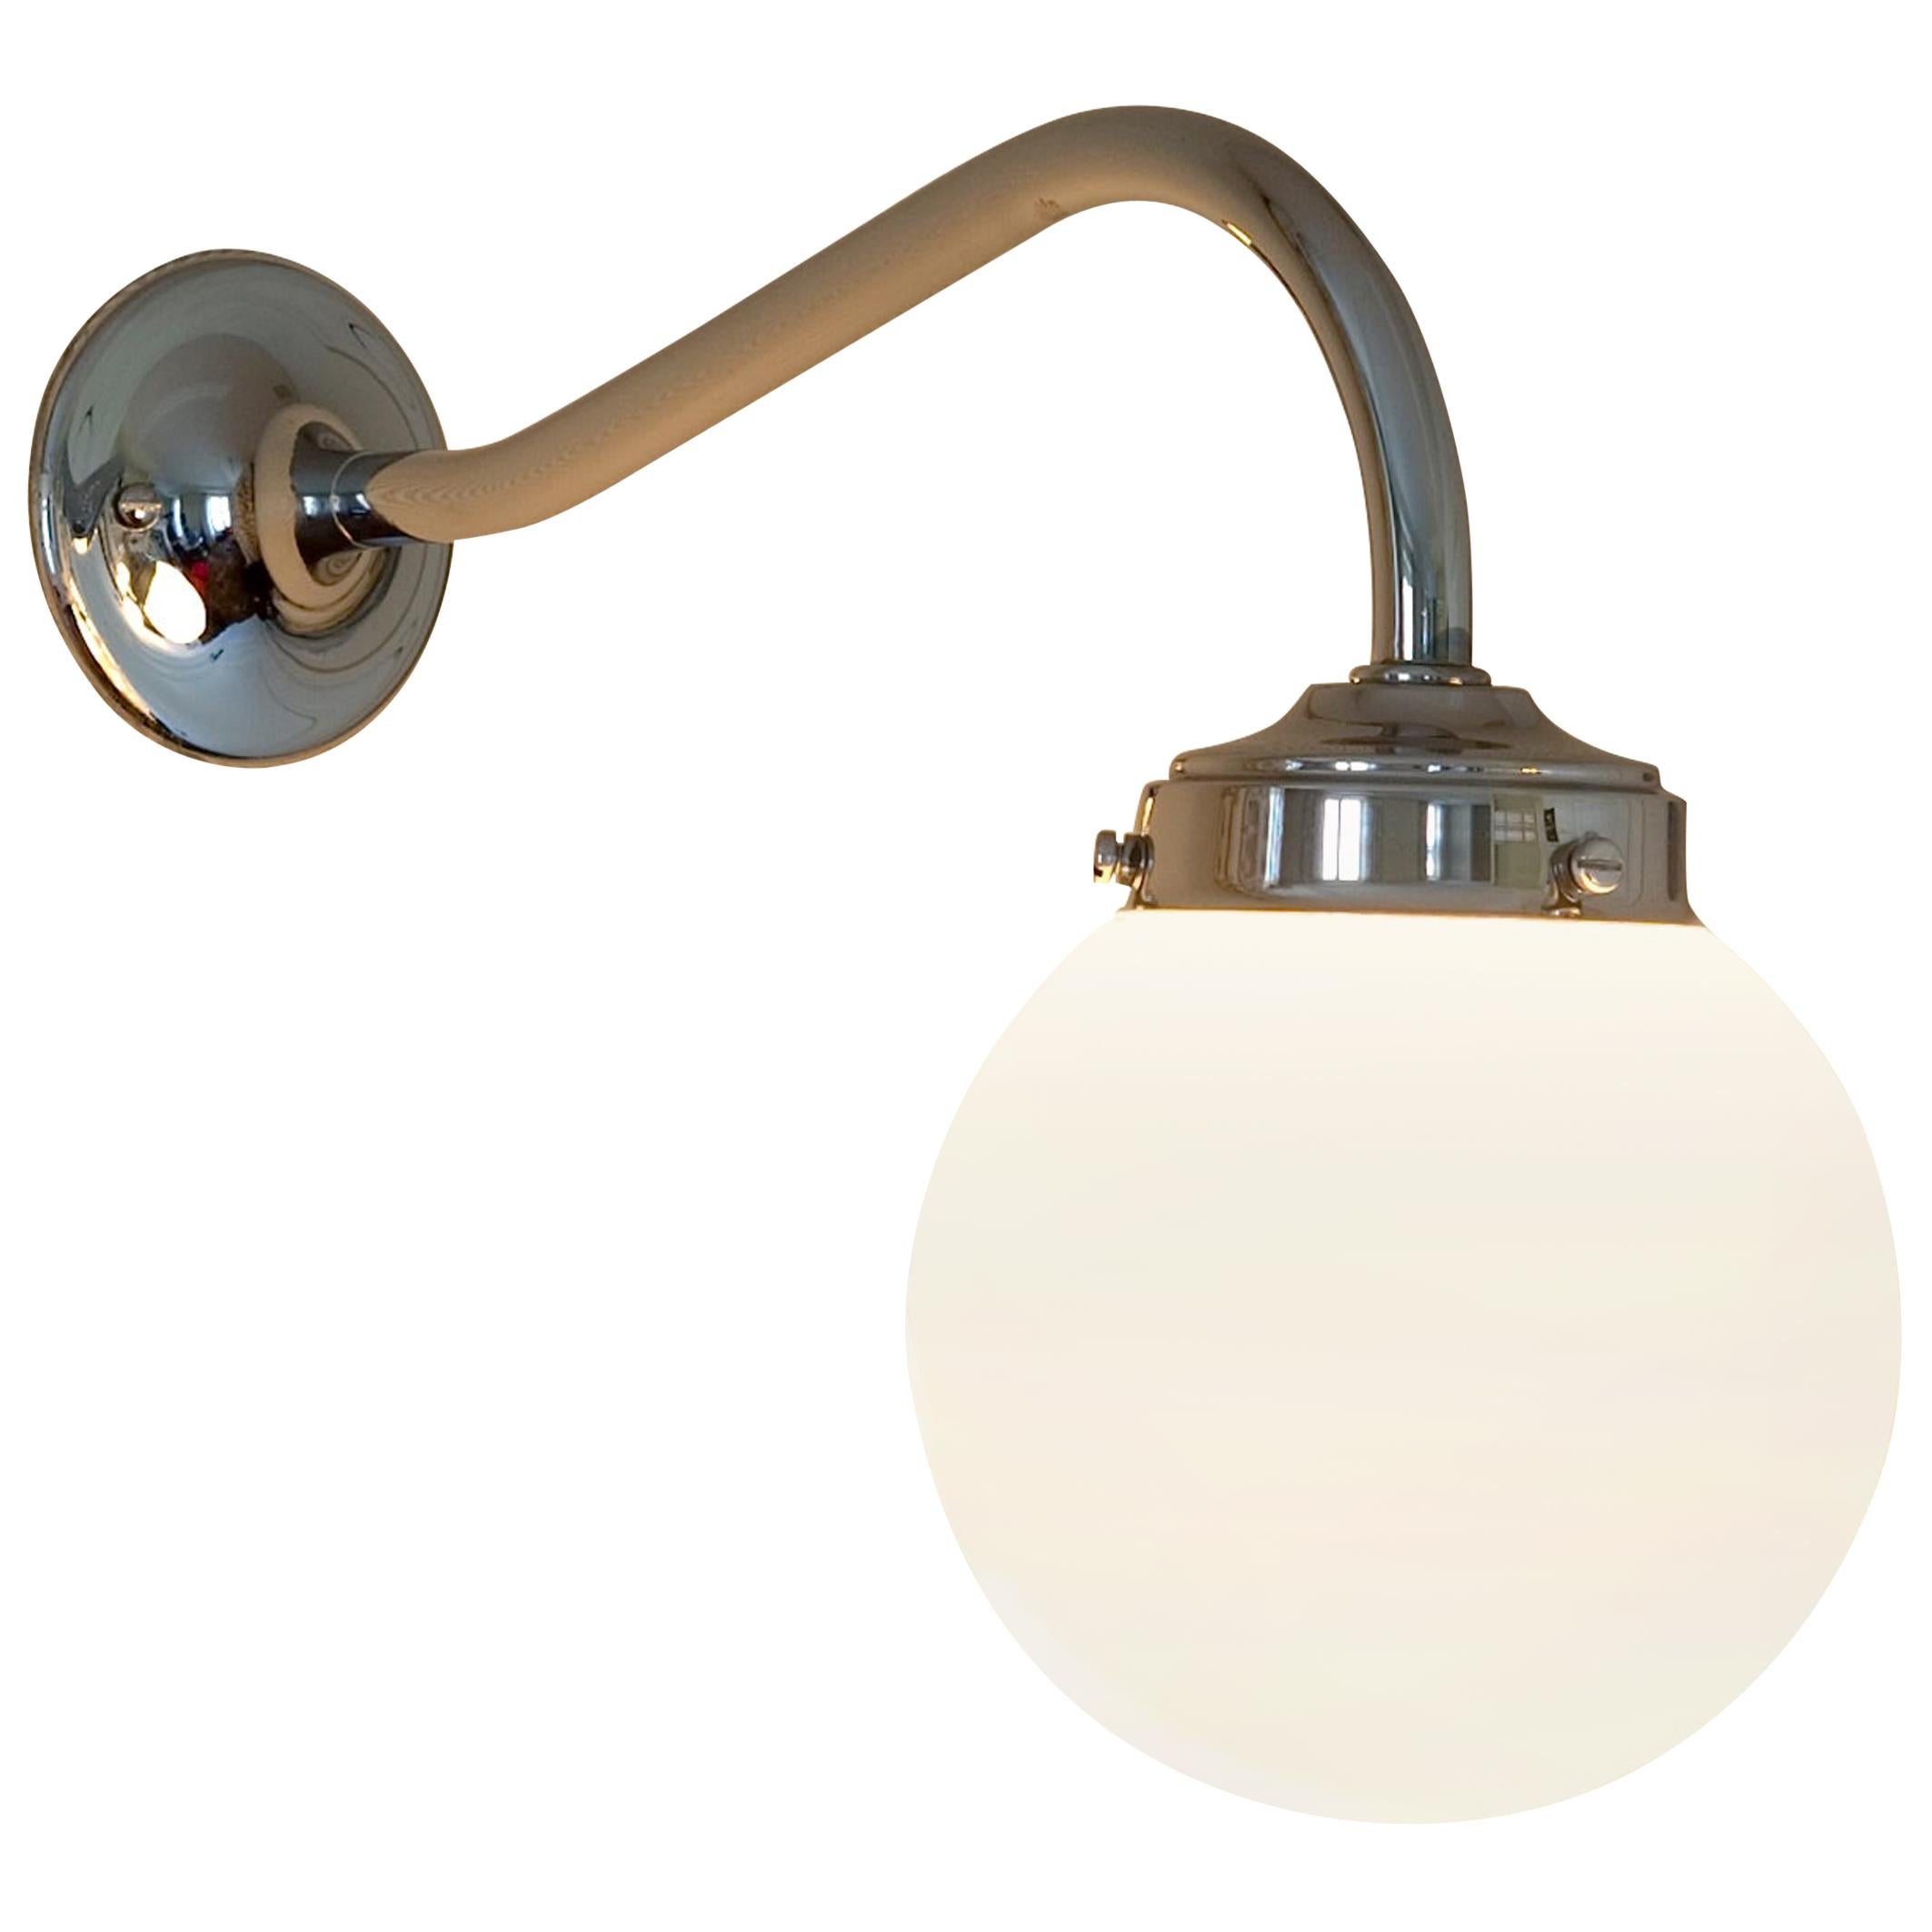 Tekna Clovelly Wall Light with Polished Nickel Finish